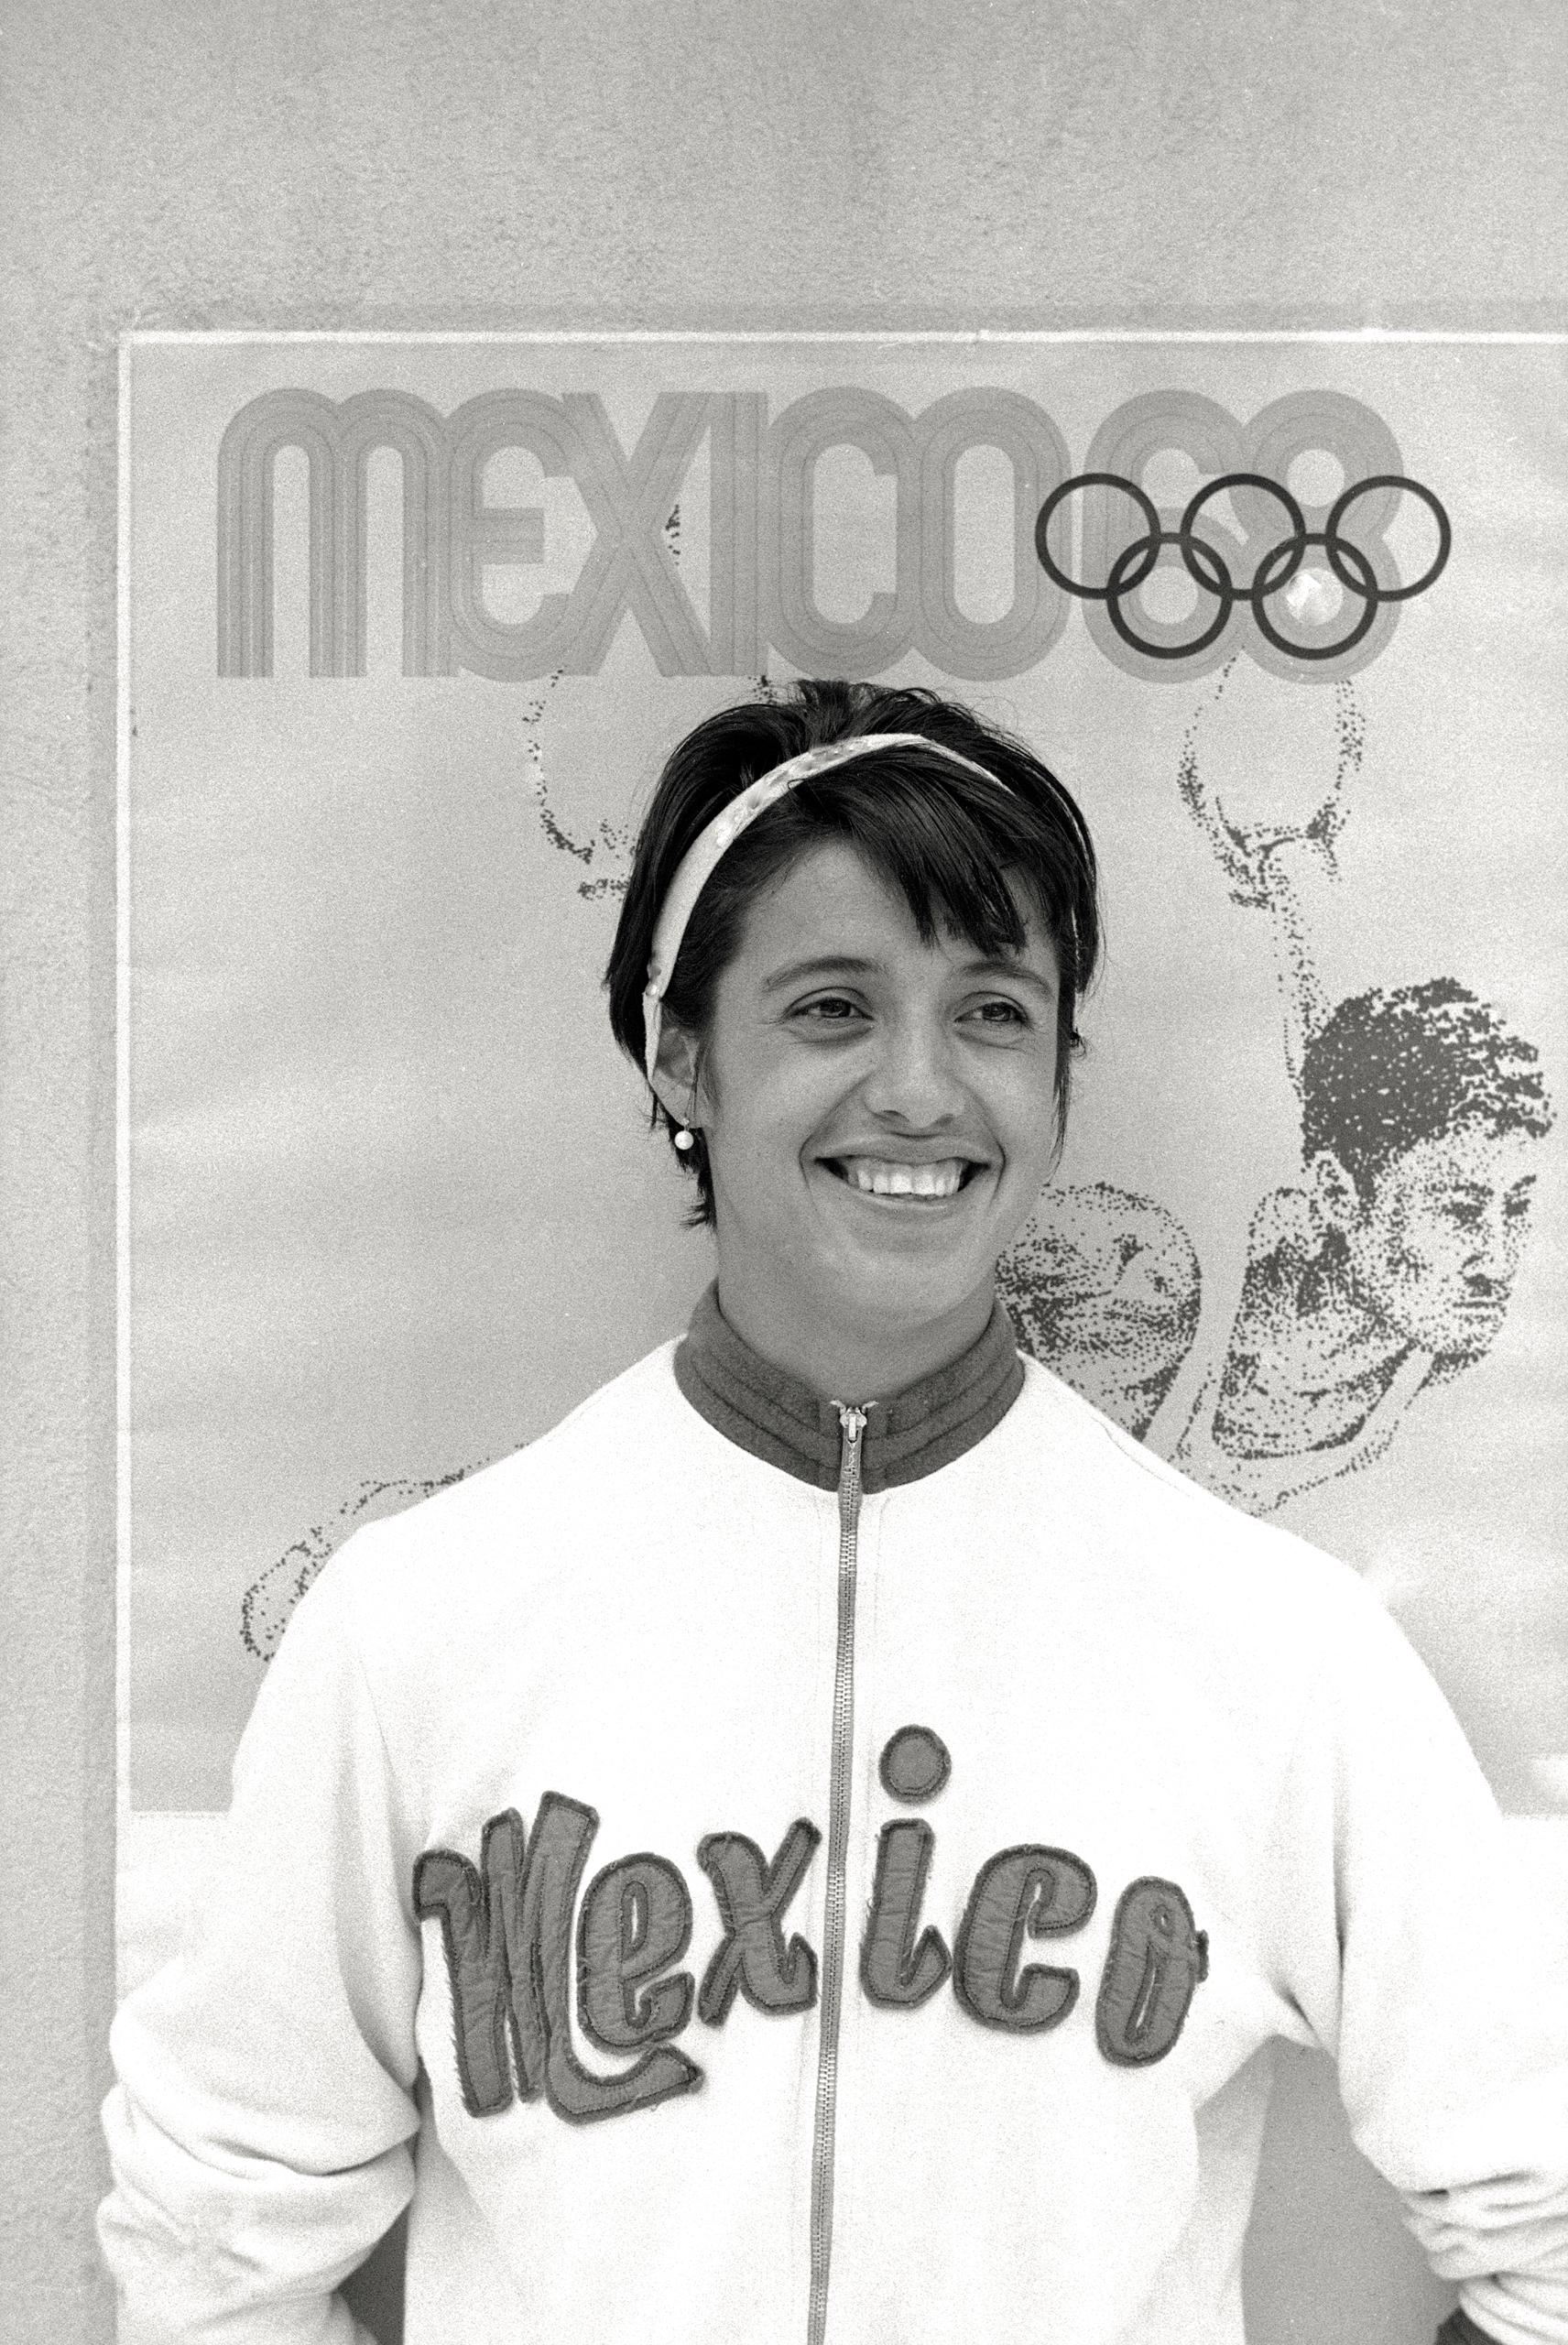 Enriqueta Basilio, a participating athlete at  the Olympic Games, is the first woman to light the Olympic Flame. Mexico City, 1968.